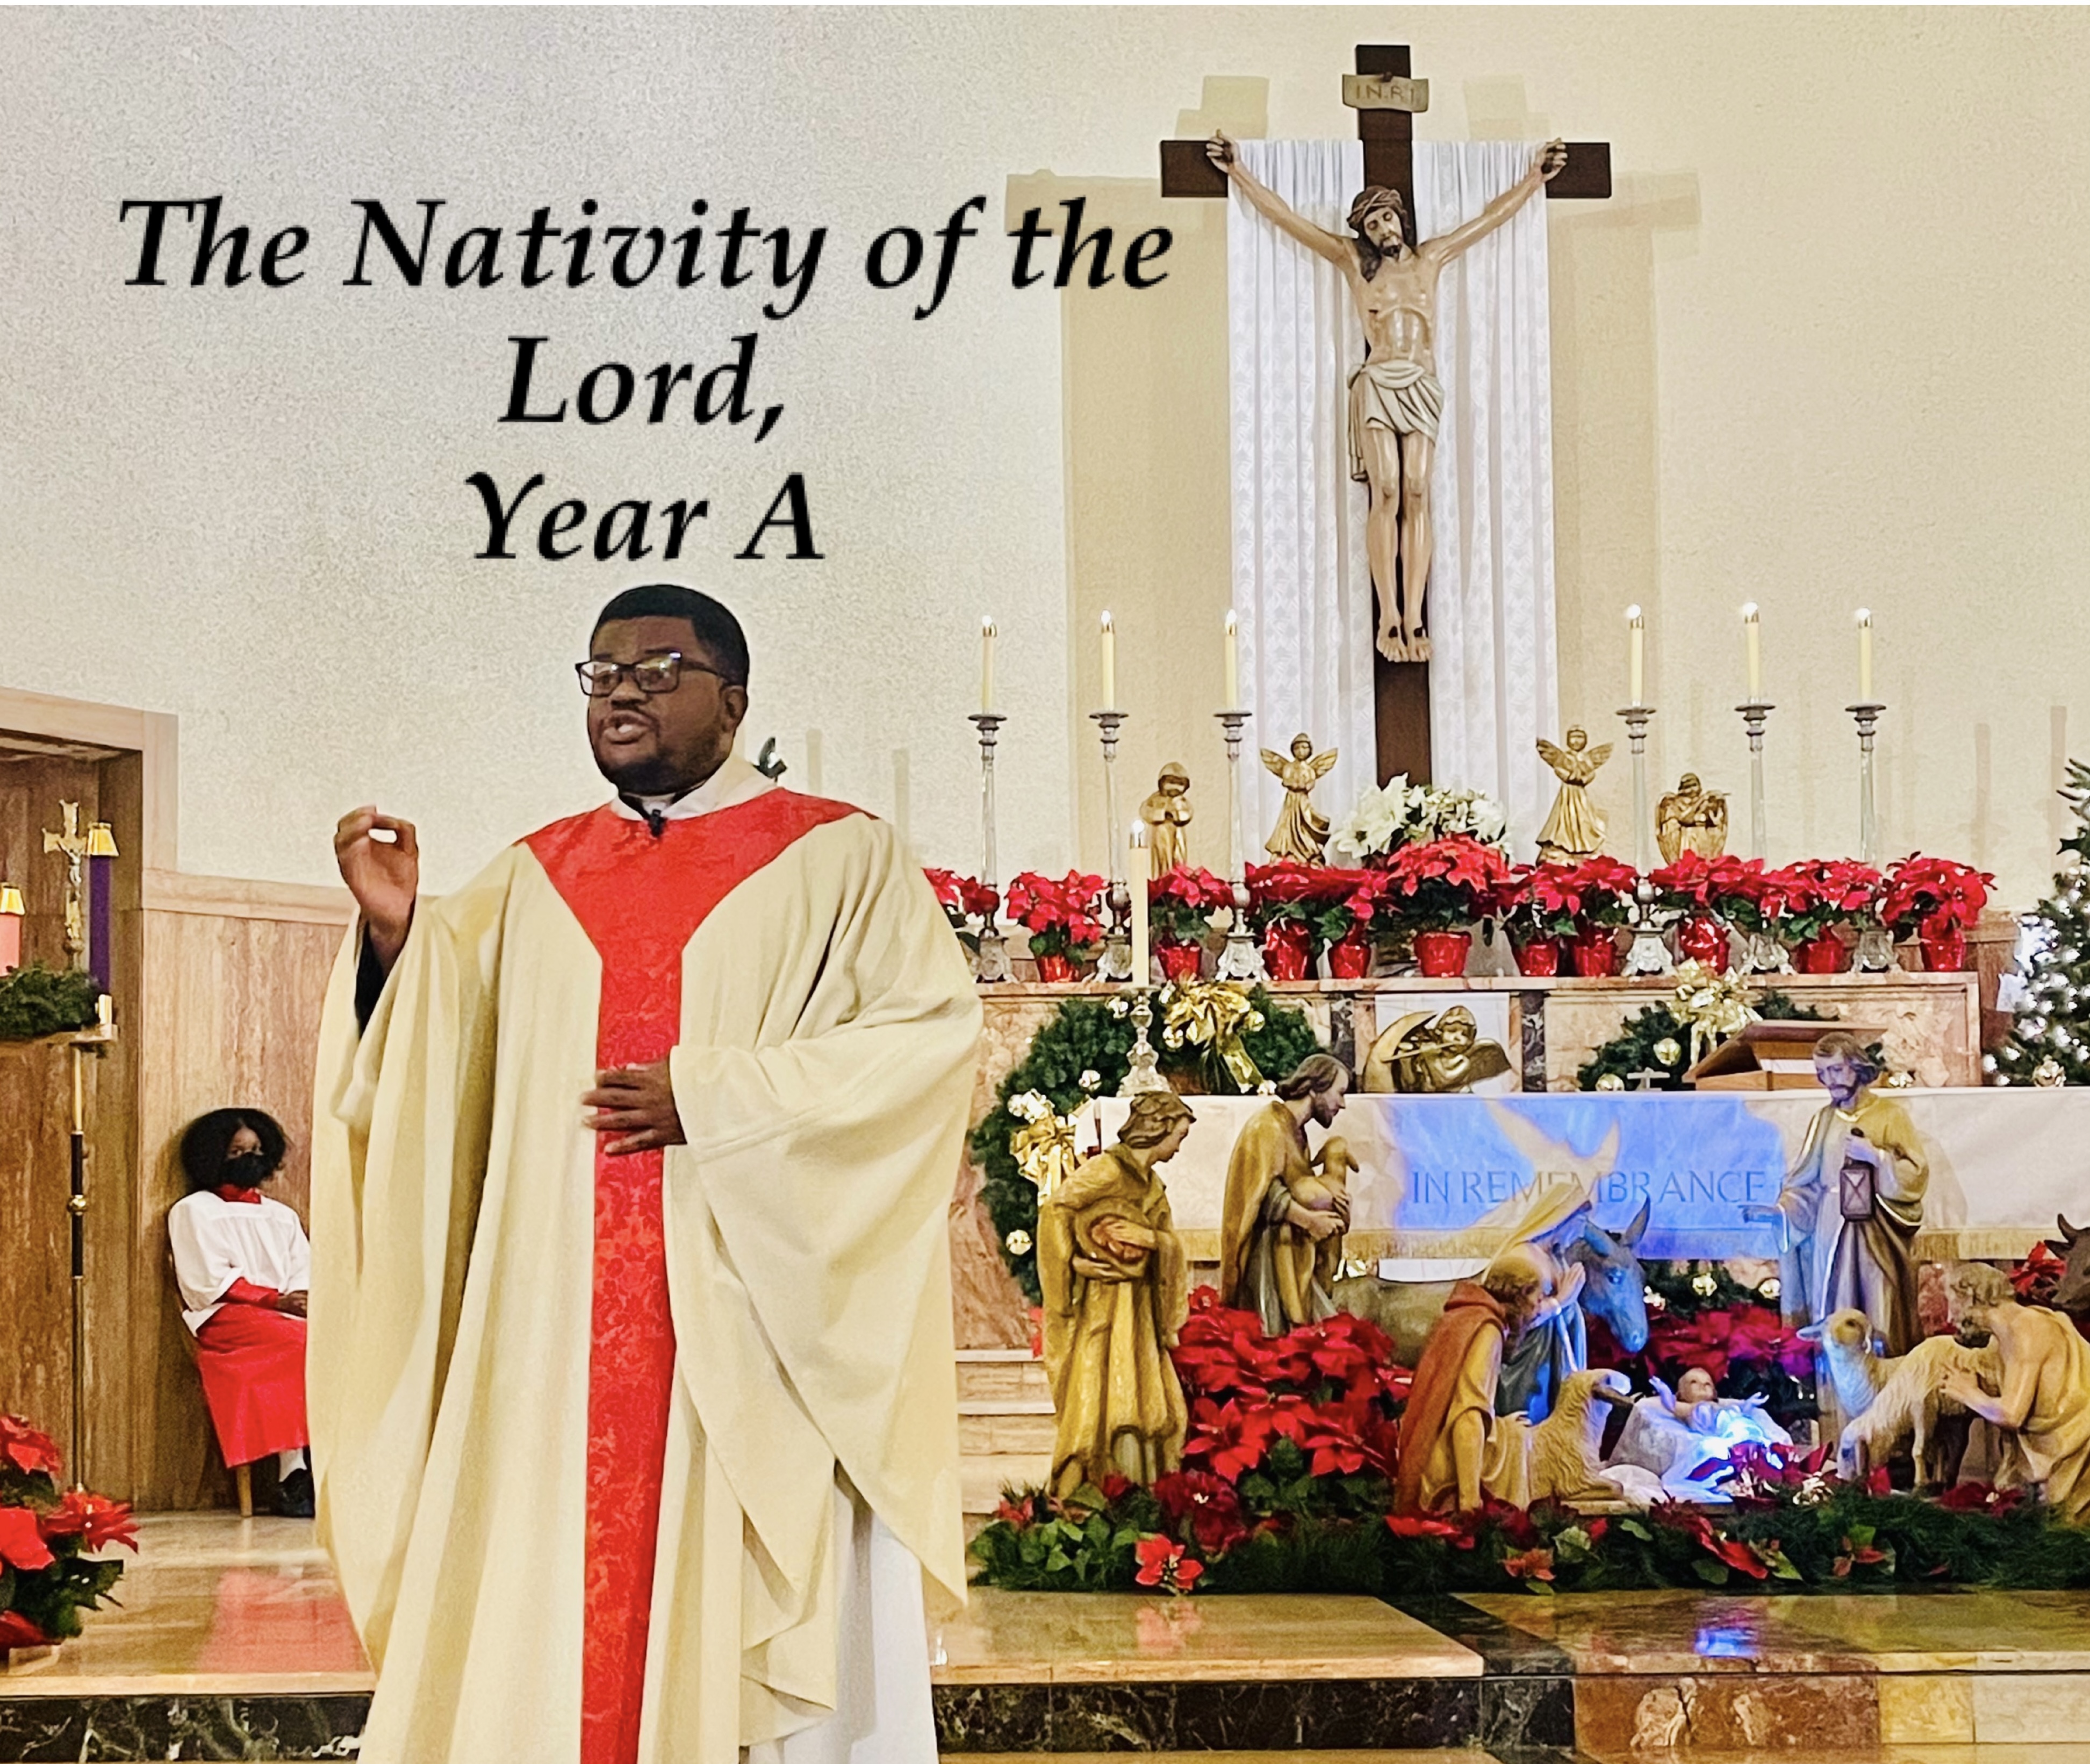 The Nativity of the Lord, Year A